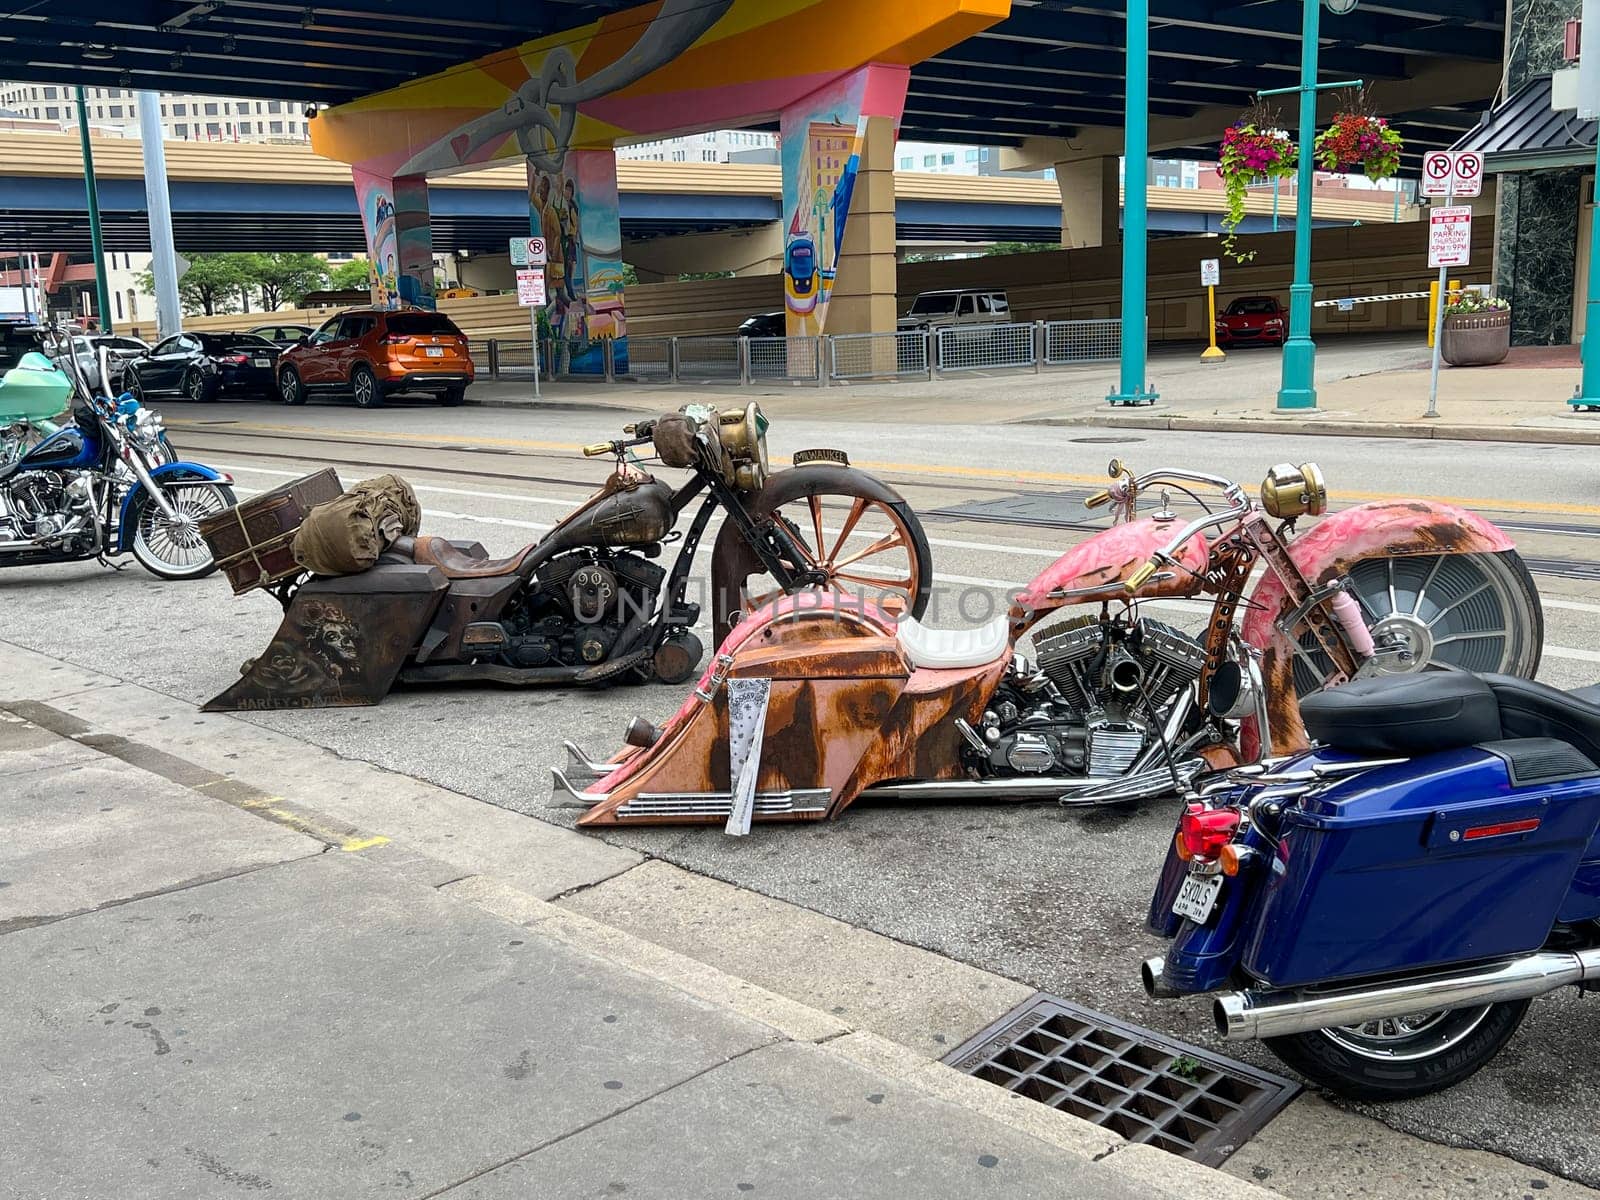 MILWAUKEE, WISCONSIN, JULY 15 2023: Downtown Milwaukee with retro customized Harley Davidsons parked outside an underpass in the city of Harley Davidson. High quality photo